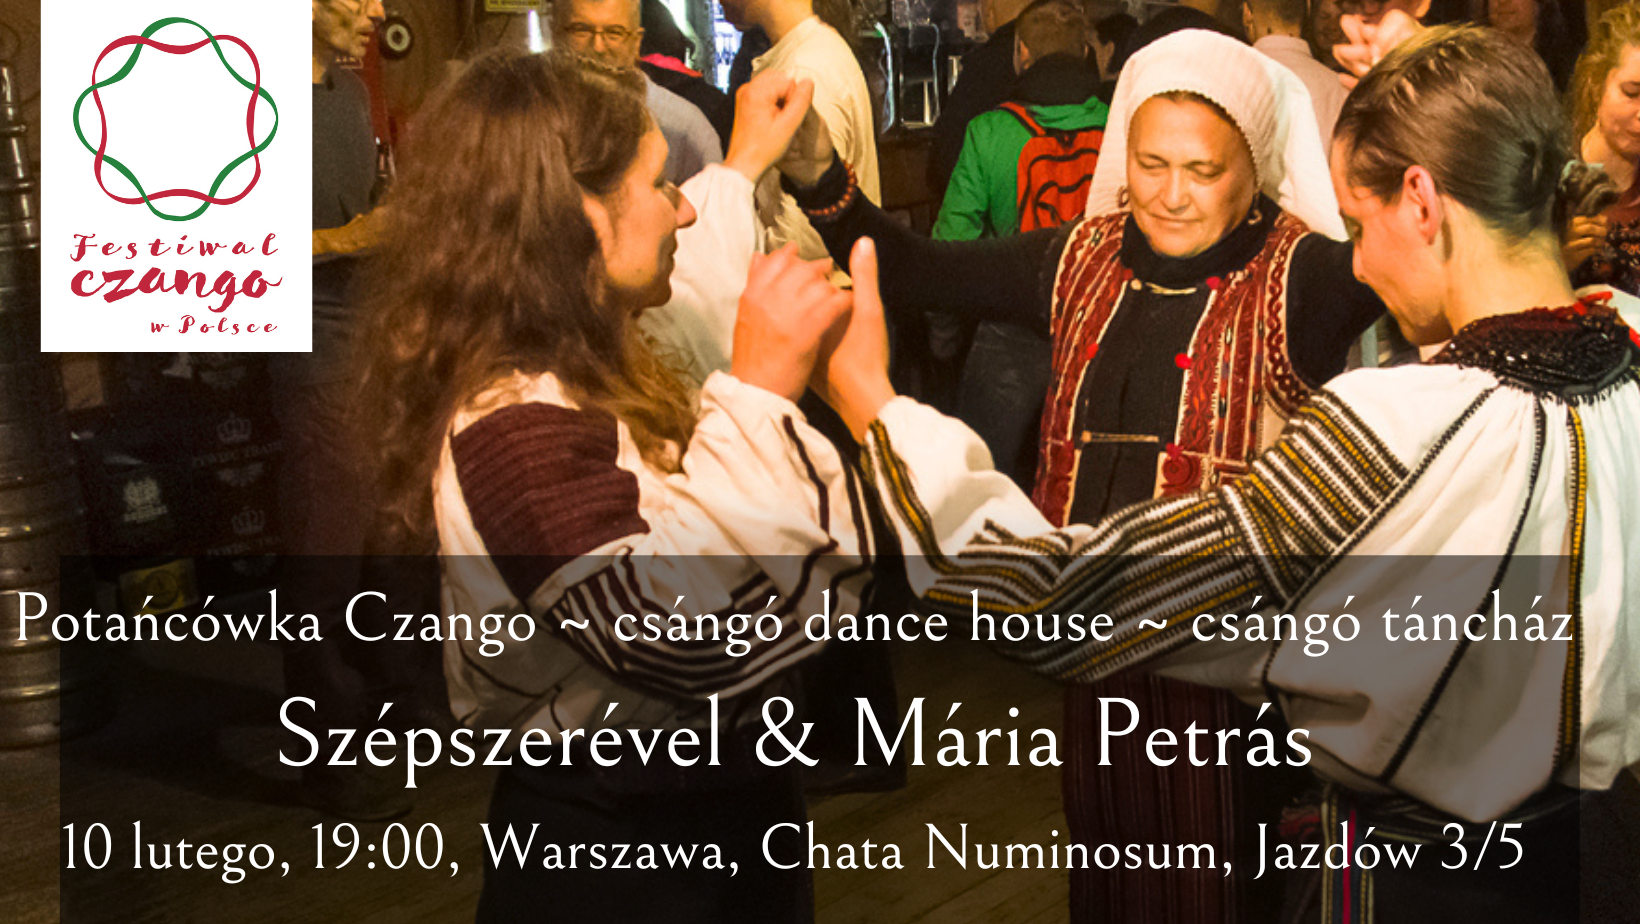 Join a carnival feast with csángó music, dancing and singing.